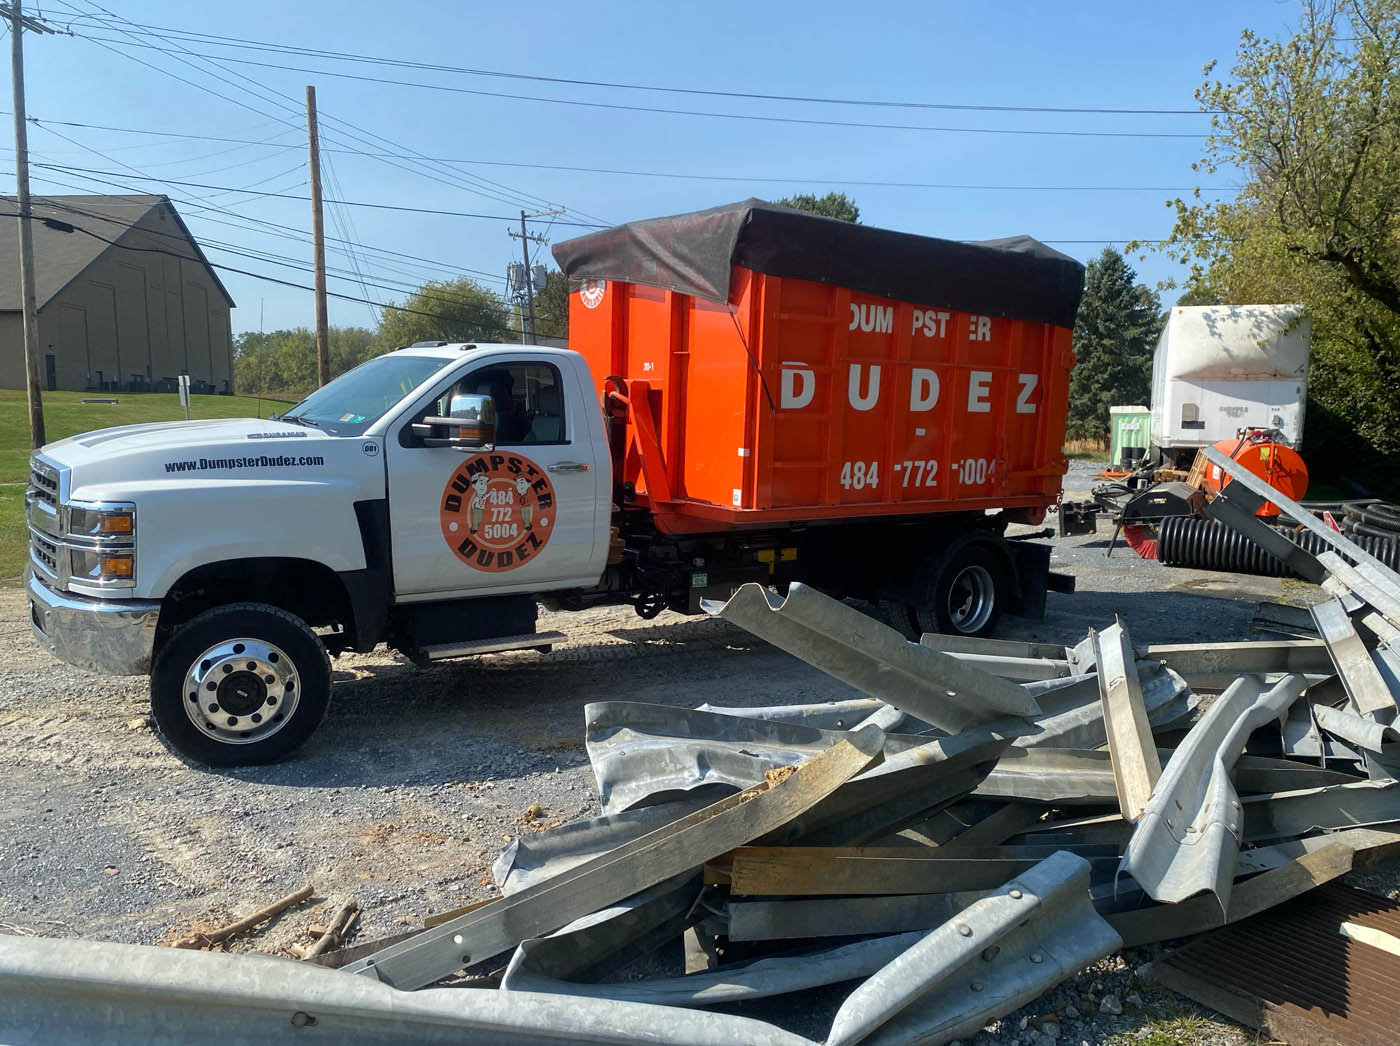 A Dumpster Dudez dumpster ready to make waste cleanup easy.